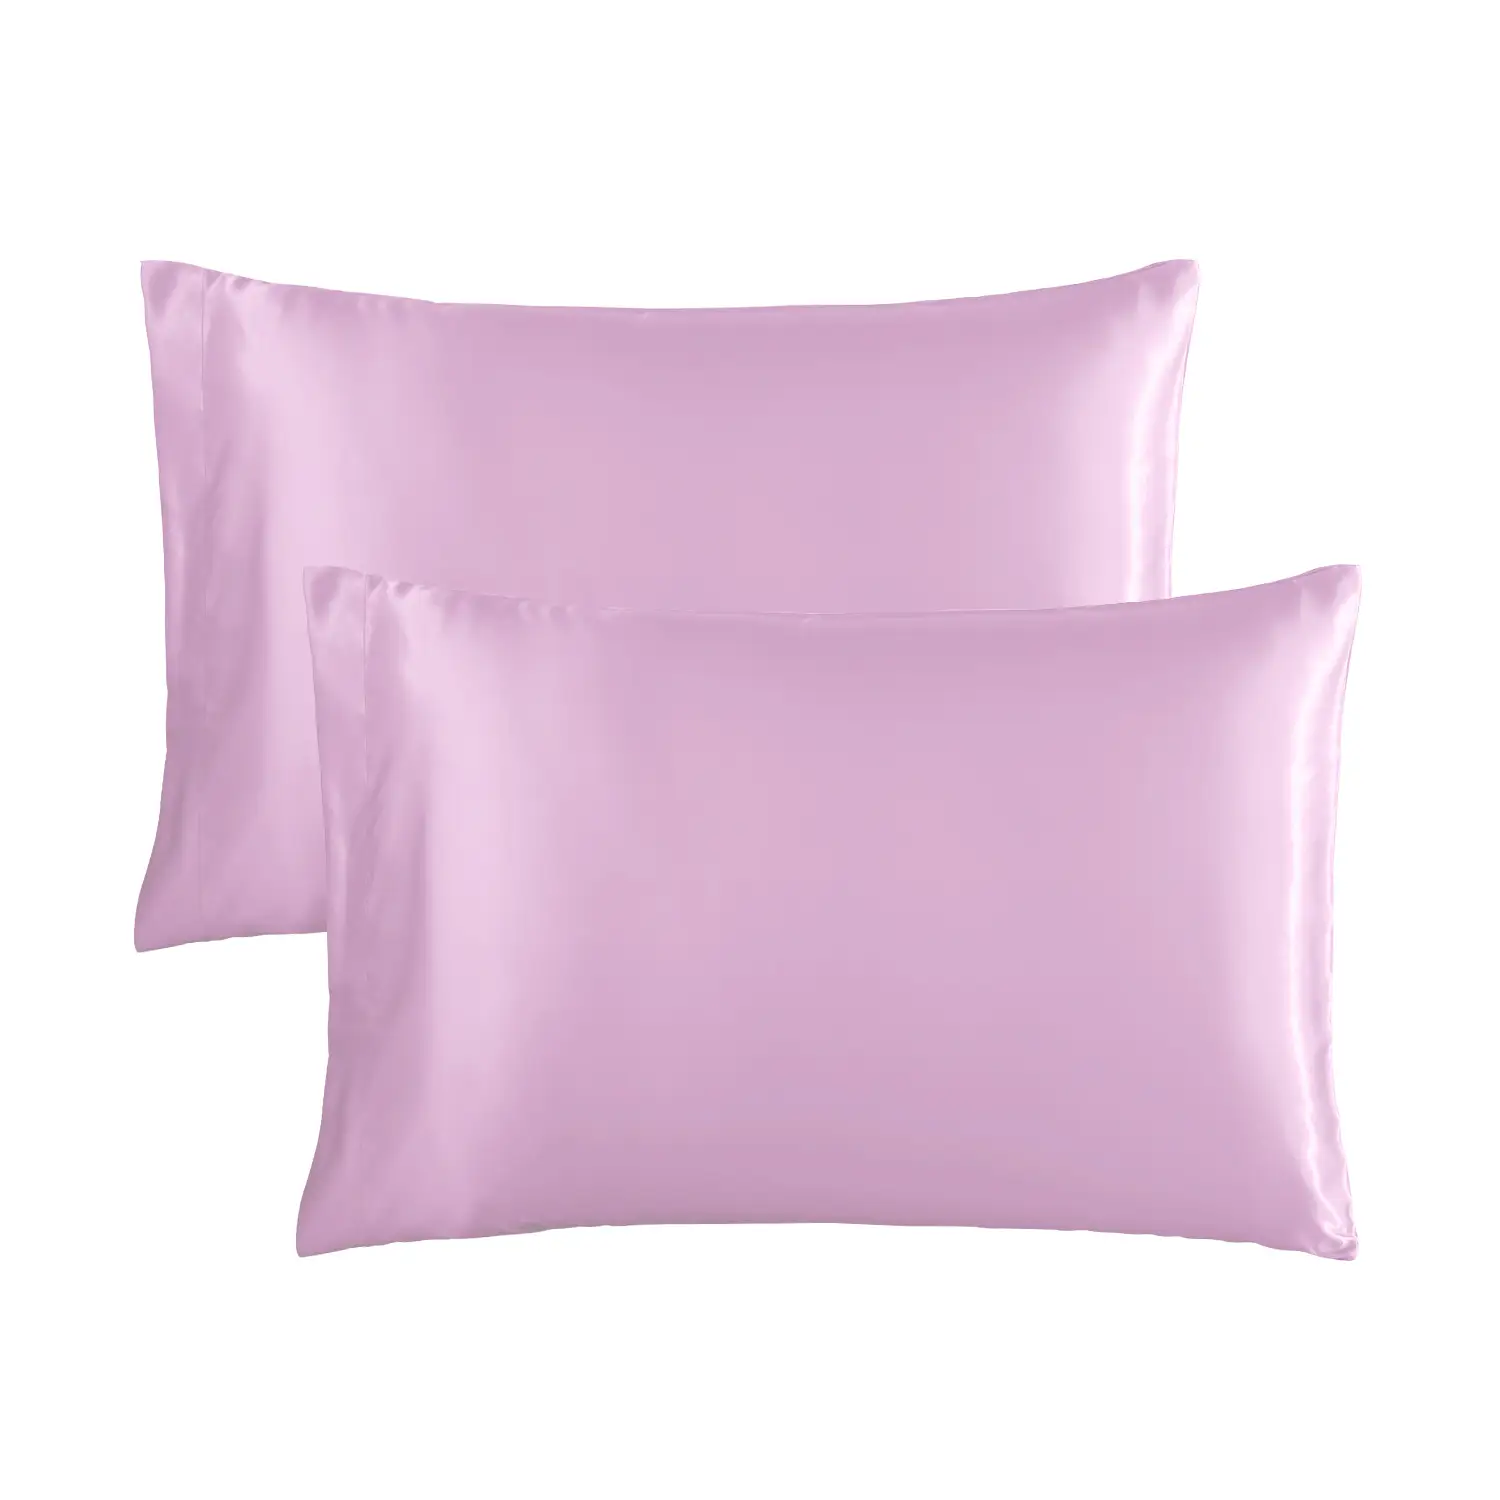 HAOK Satin Pillowcase for Hair and Skin, Silky Soft Pillow Cover with Envelop Closure - 2 Pack